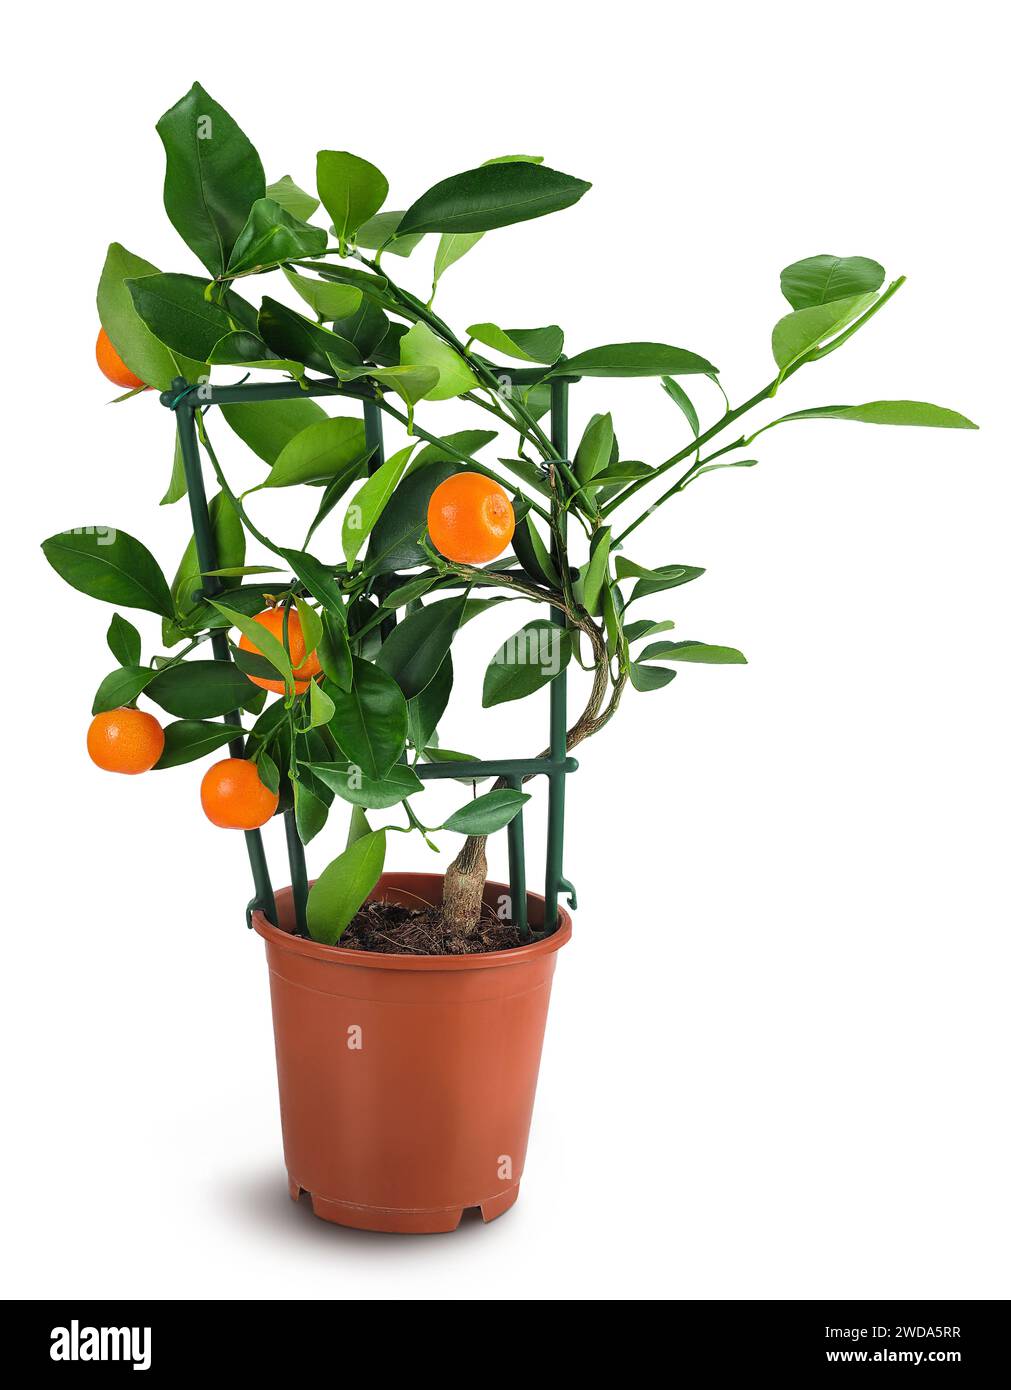 Small tangerines tree in a flower pot isolated on white background. Stock Photo